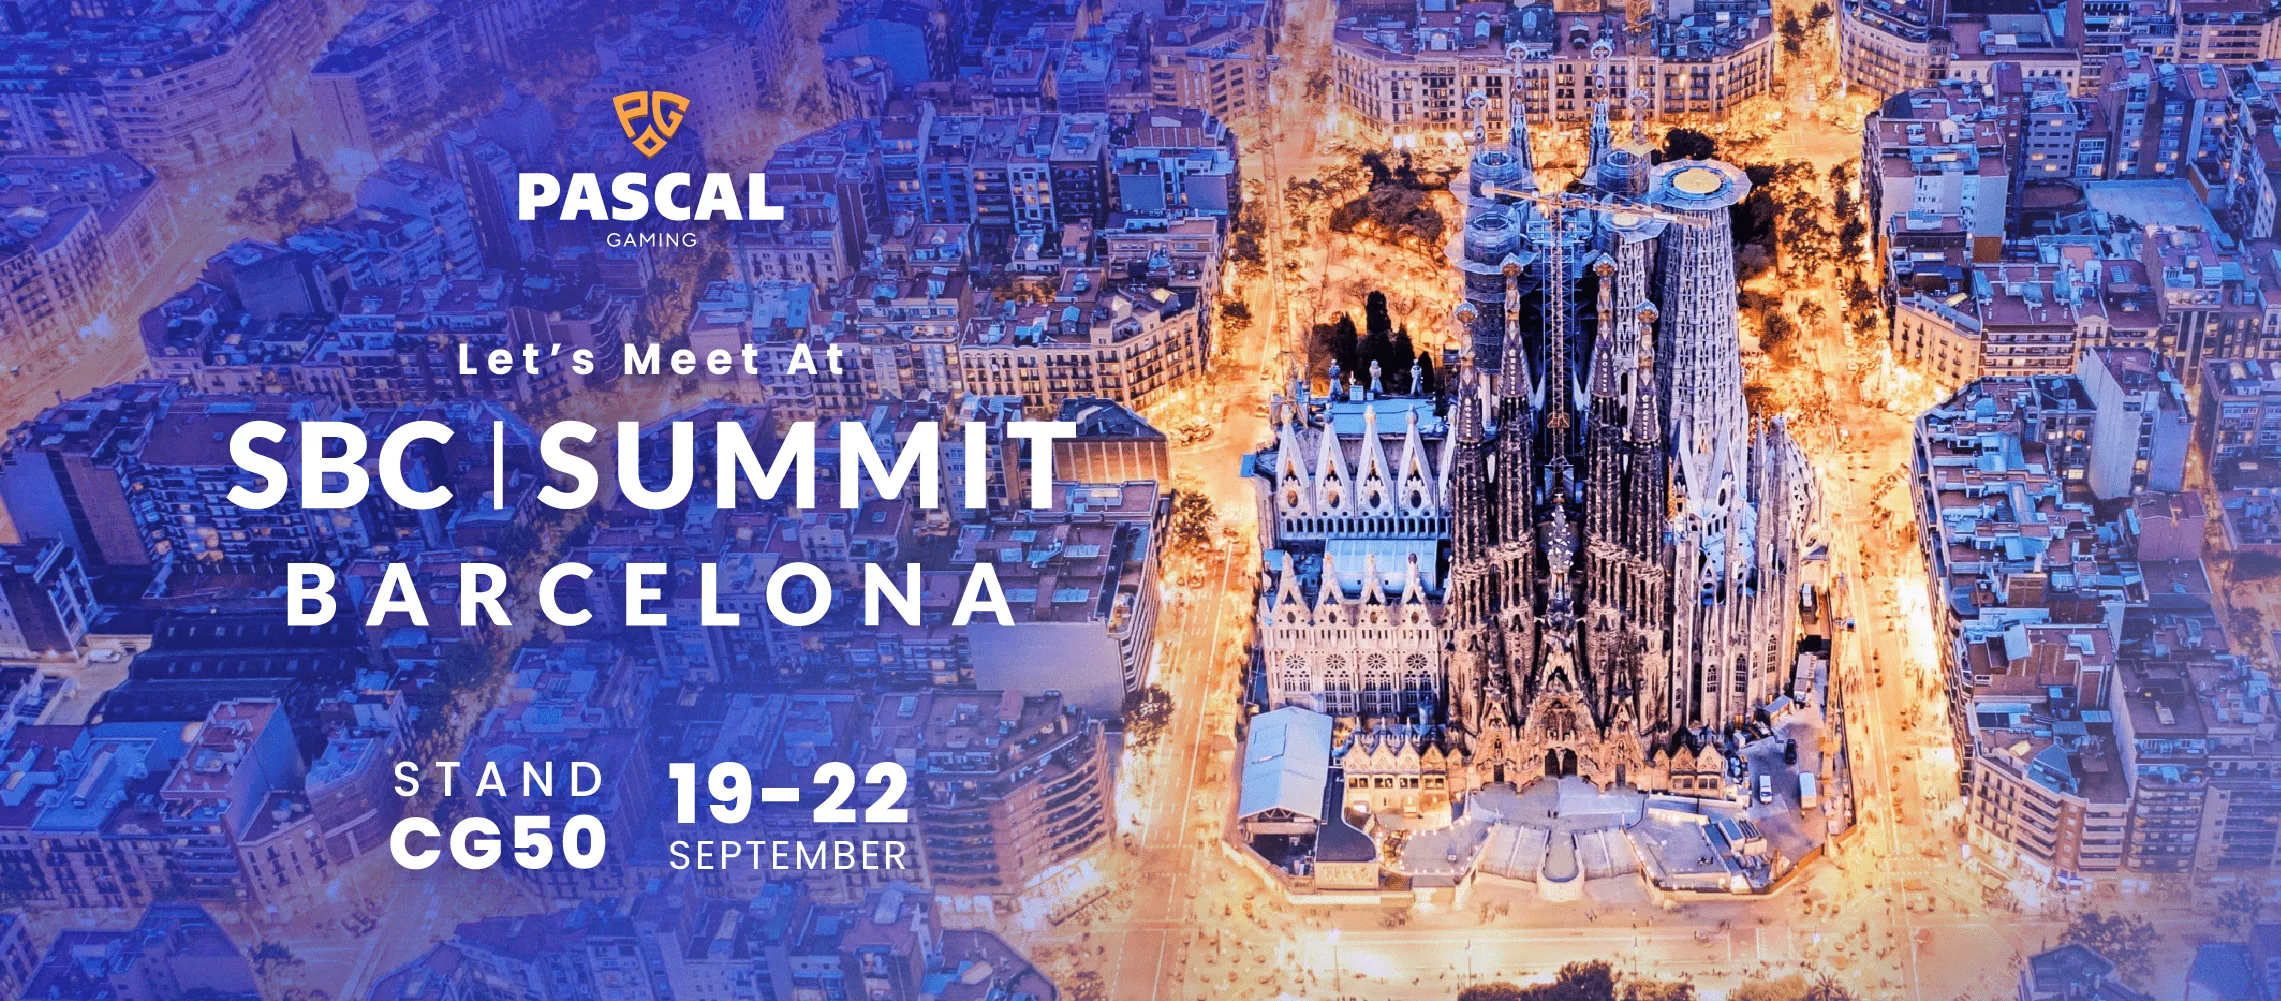 Pascal Gaming is heading to SBC Summit Barcelona 